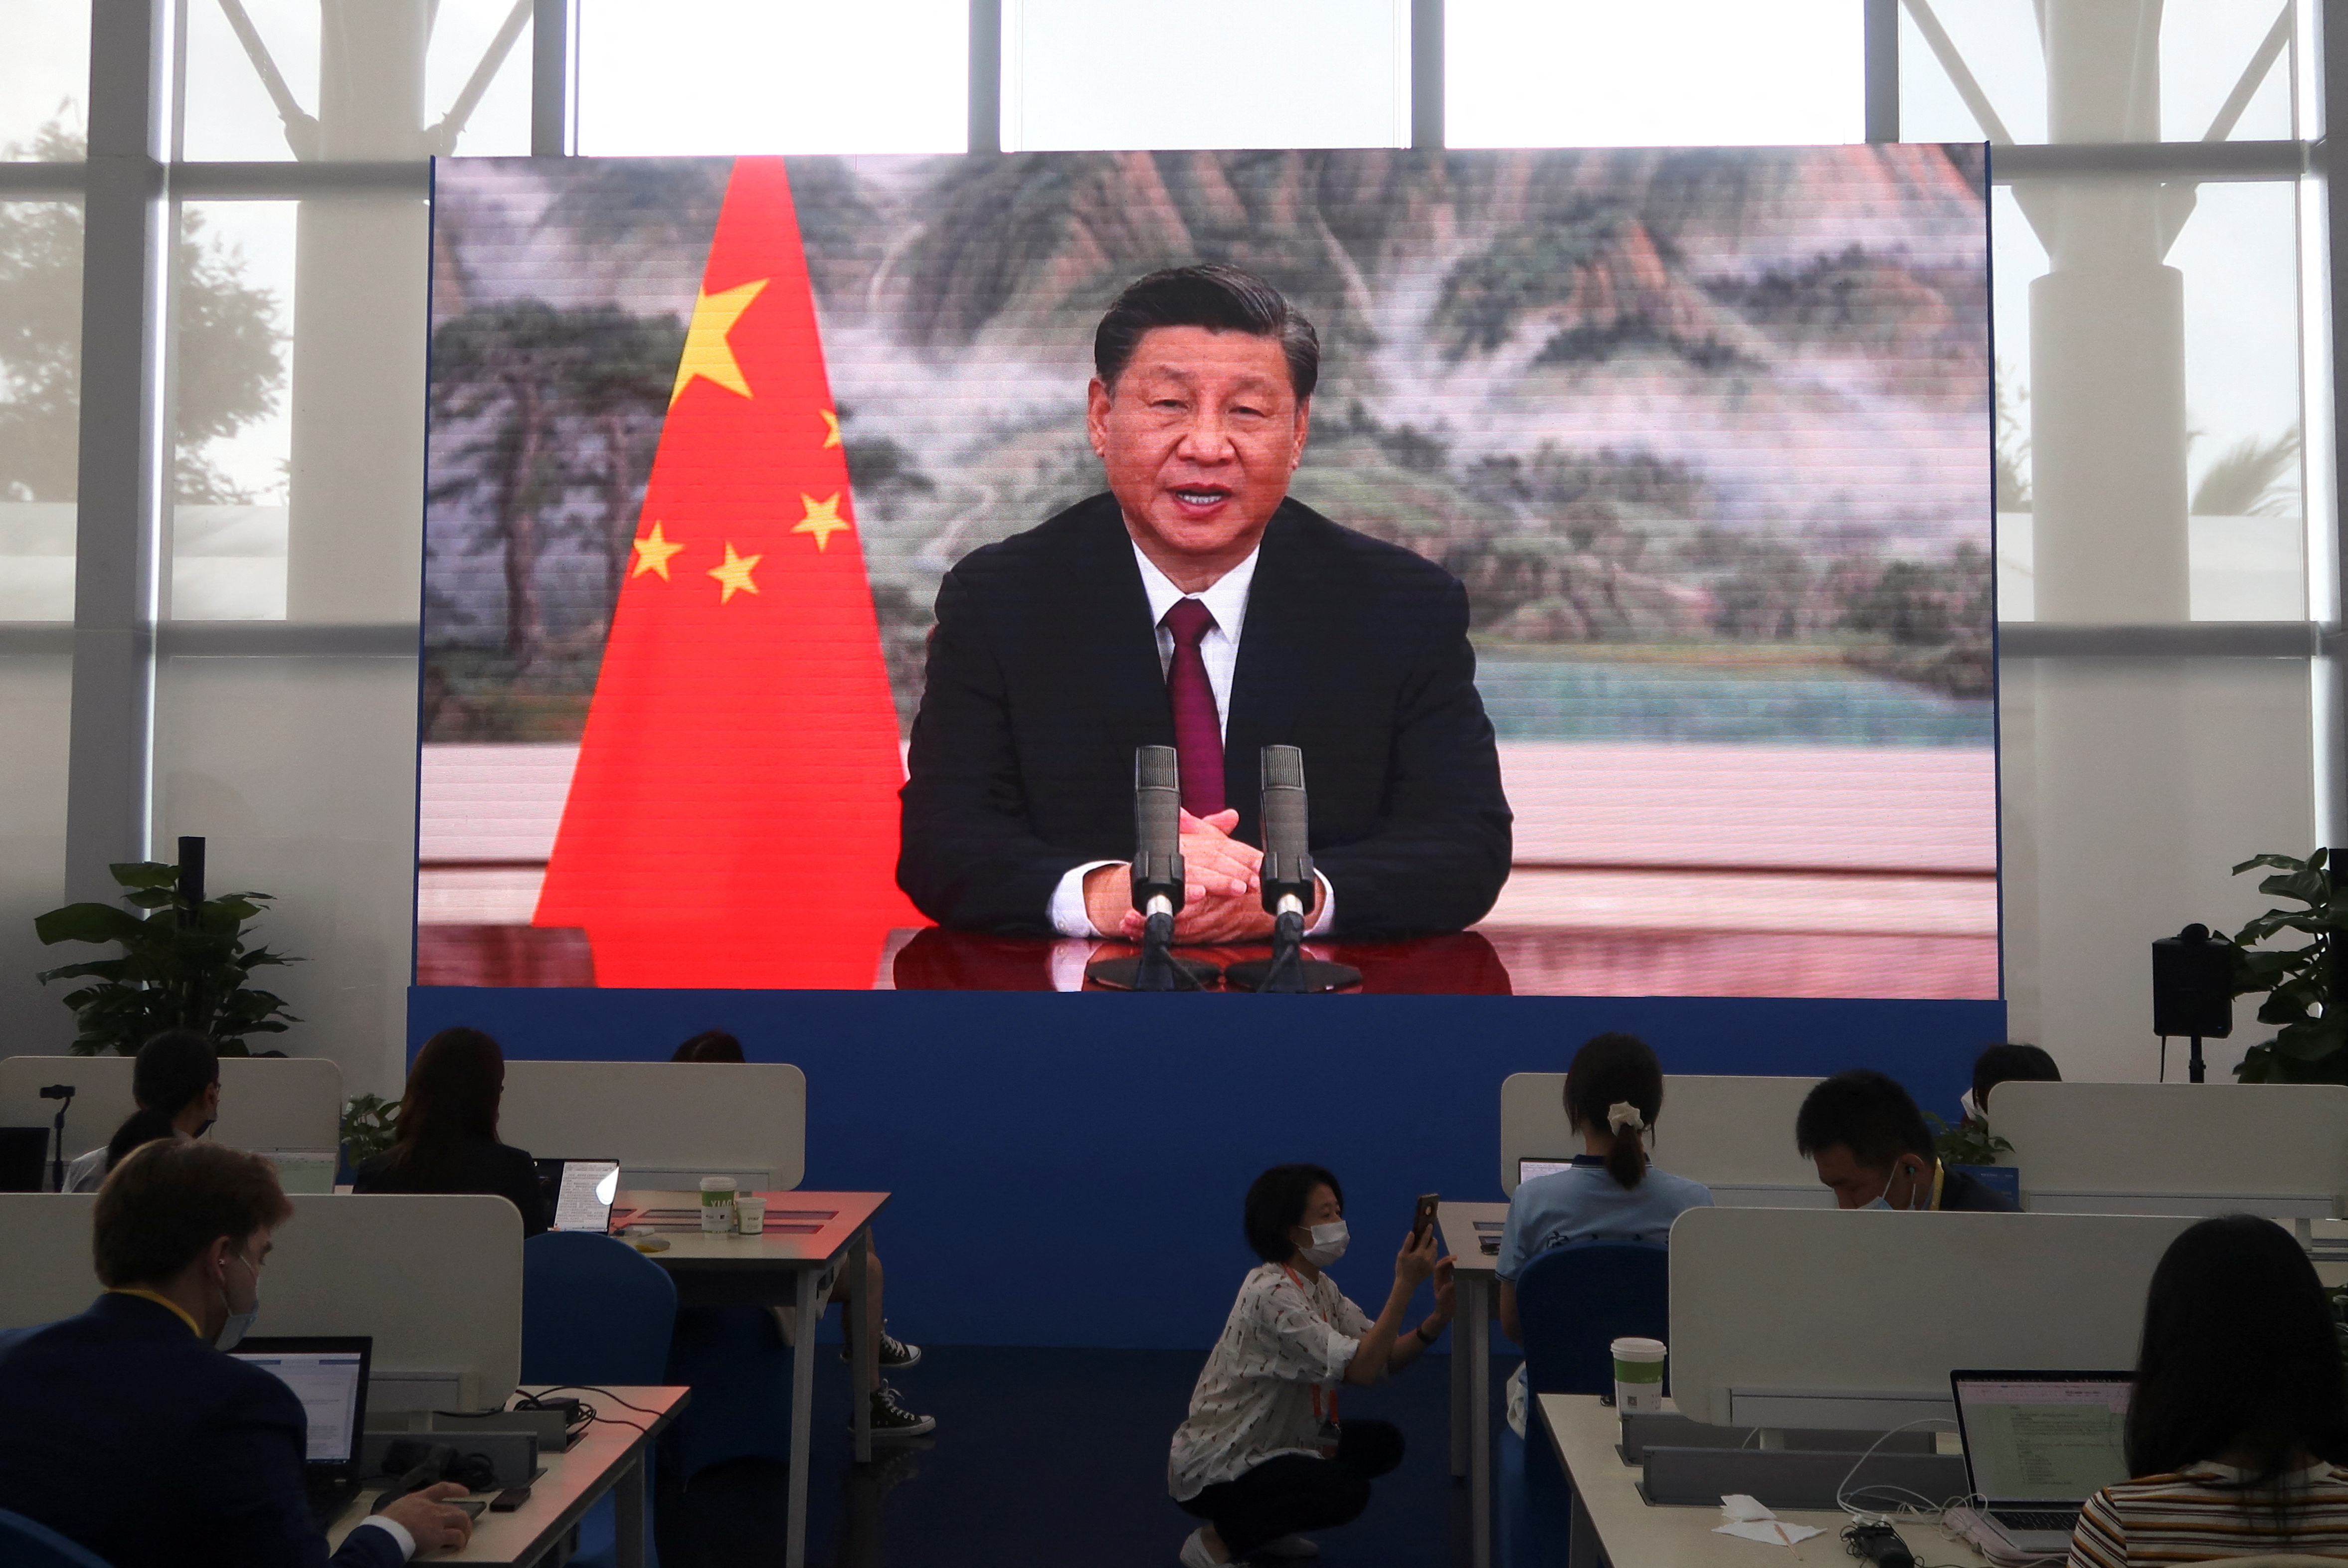 Chinese President Xi Jinping delivers a keynote address at the opening ceremony of the Boao Forum for Asia via video link, in Boao.